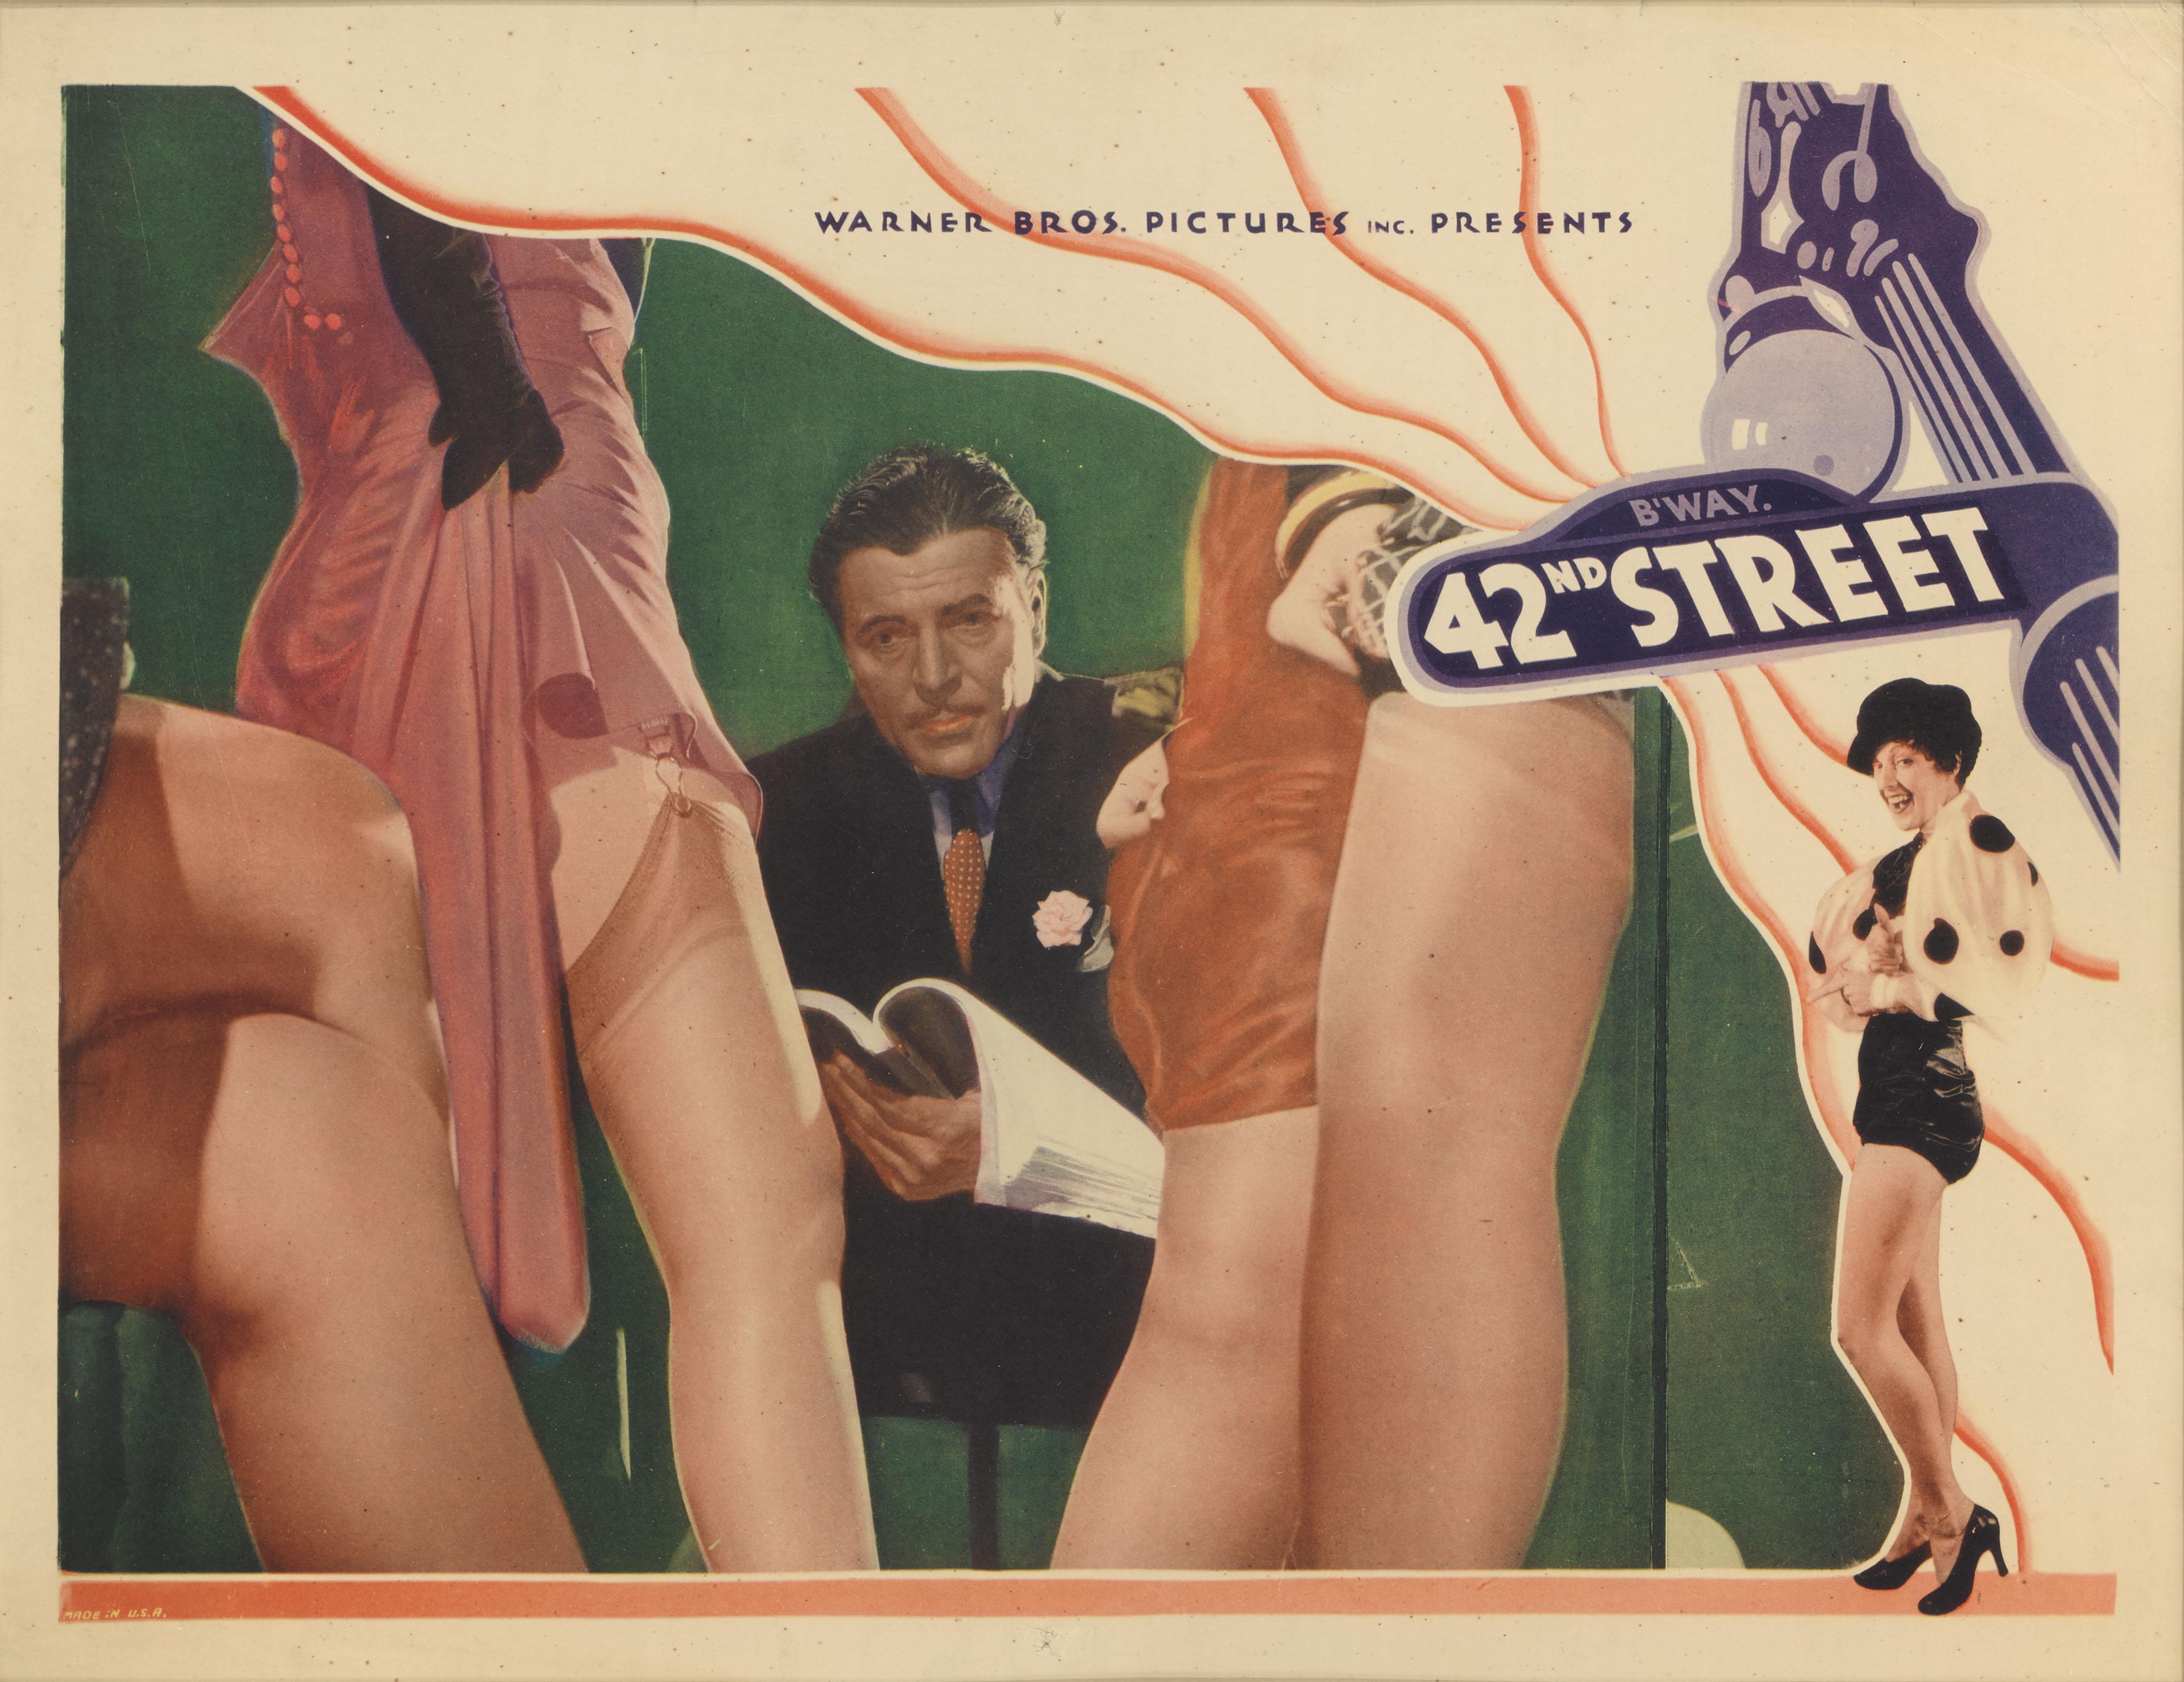 Original US lobby card for the 1934musical comedy 42nd Street.
This film starredWarner Baxter, Bebe Daniels and George Brent and was directed by Lloyd Bacon.
This lobby card is conservation framed with UV plexiglass in an Obeche wood frame with